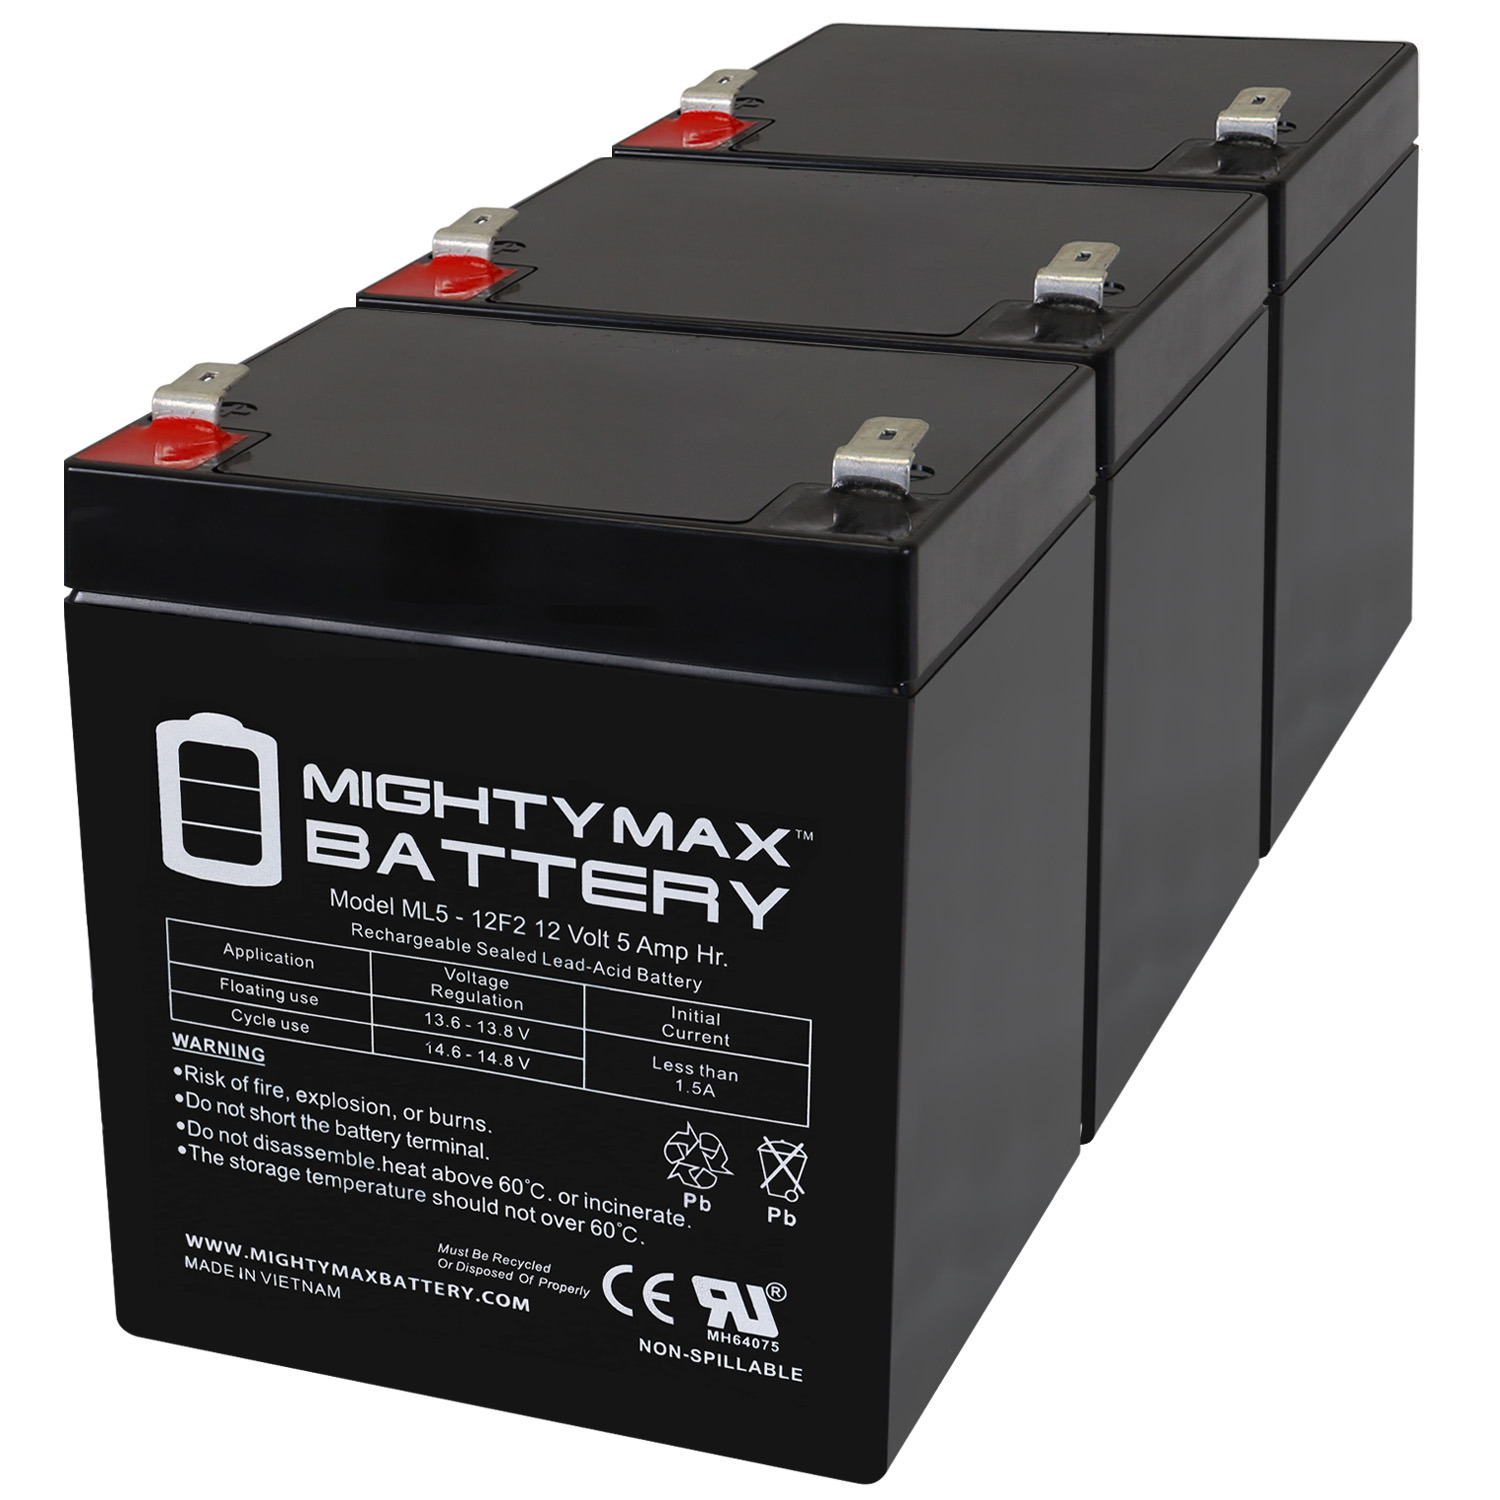 12V 5Ah F2 SLA Replacement Battery for Xcooter MINI-X ElectricScooter - 3 Pack